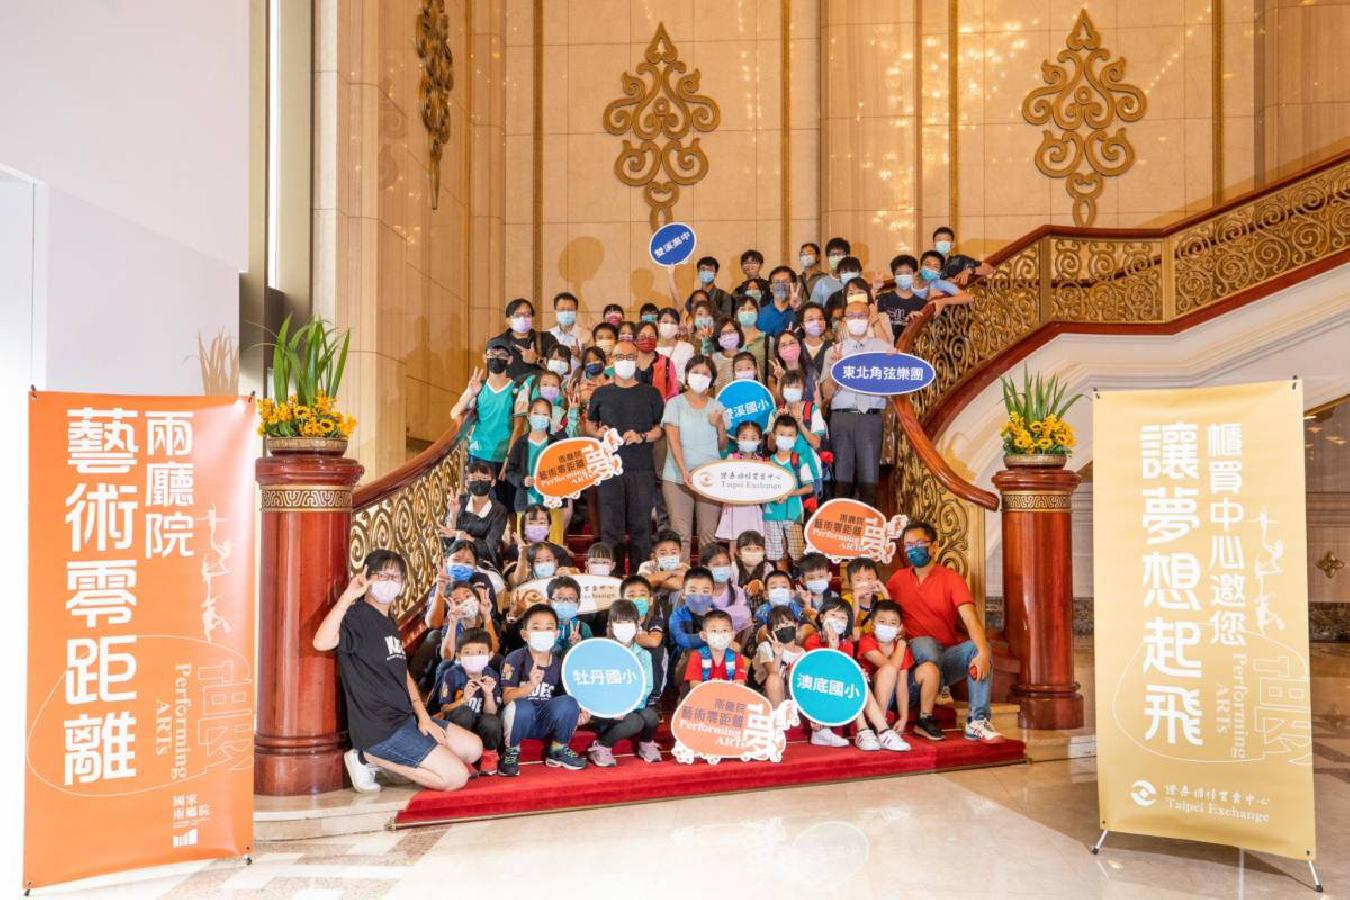 TPEx sponsored “Art without Distance” held by the National Theater & Concert Hall for children in rural areas to participate in art and cultural events .